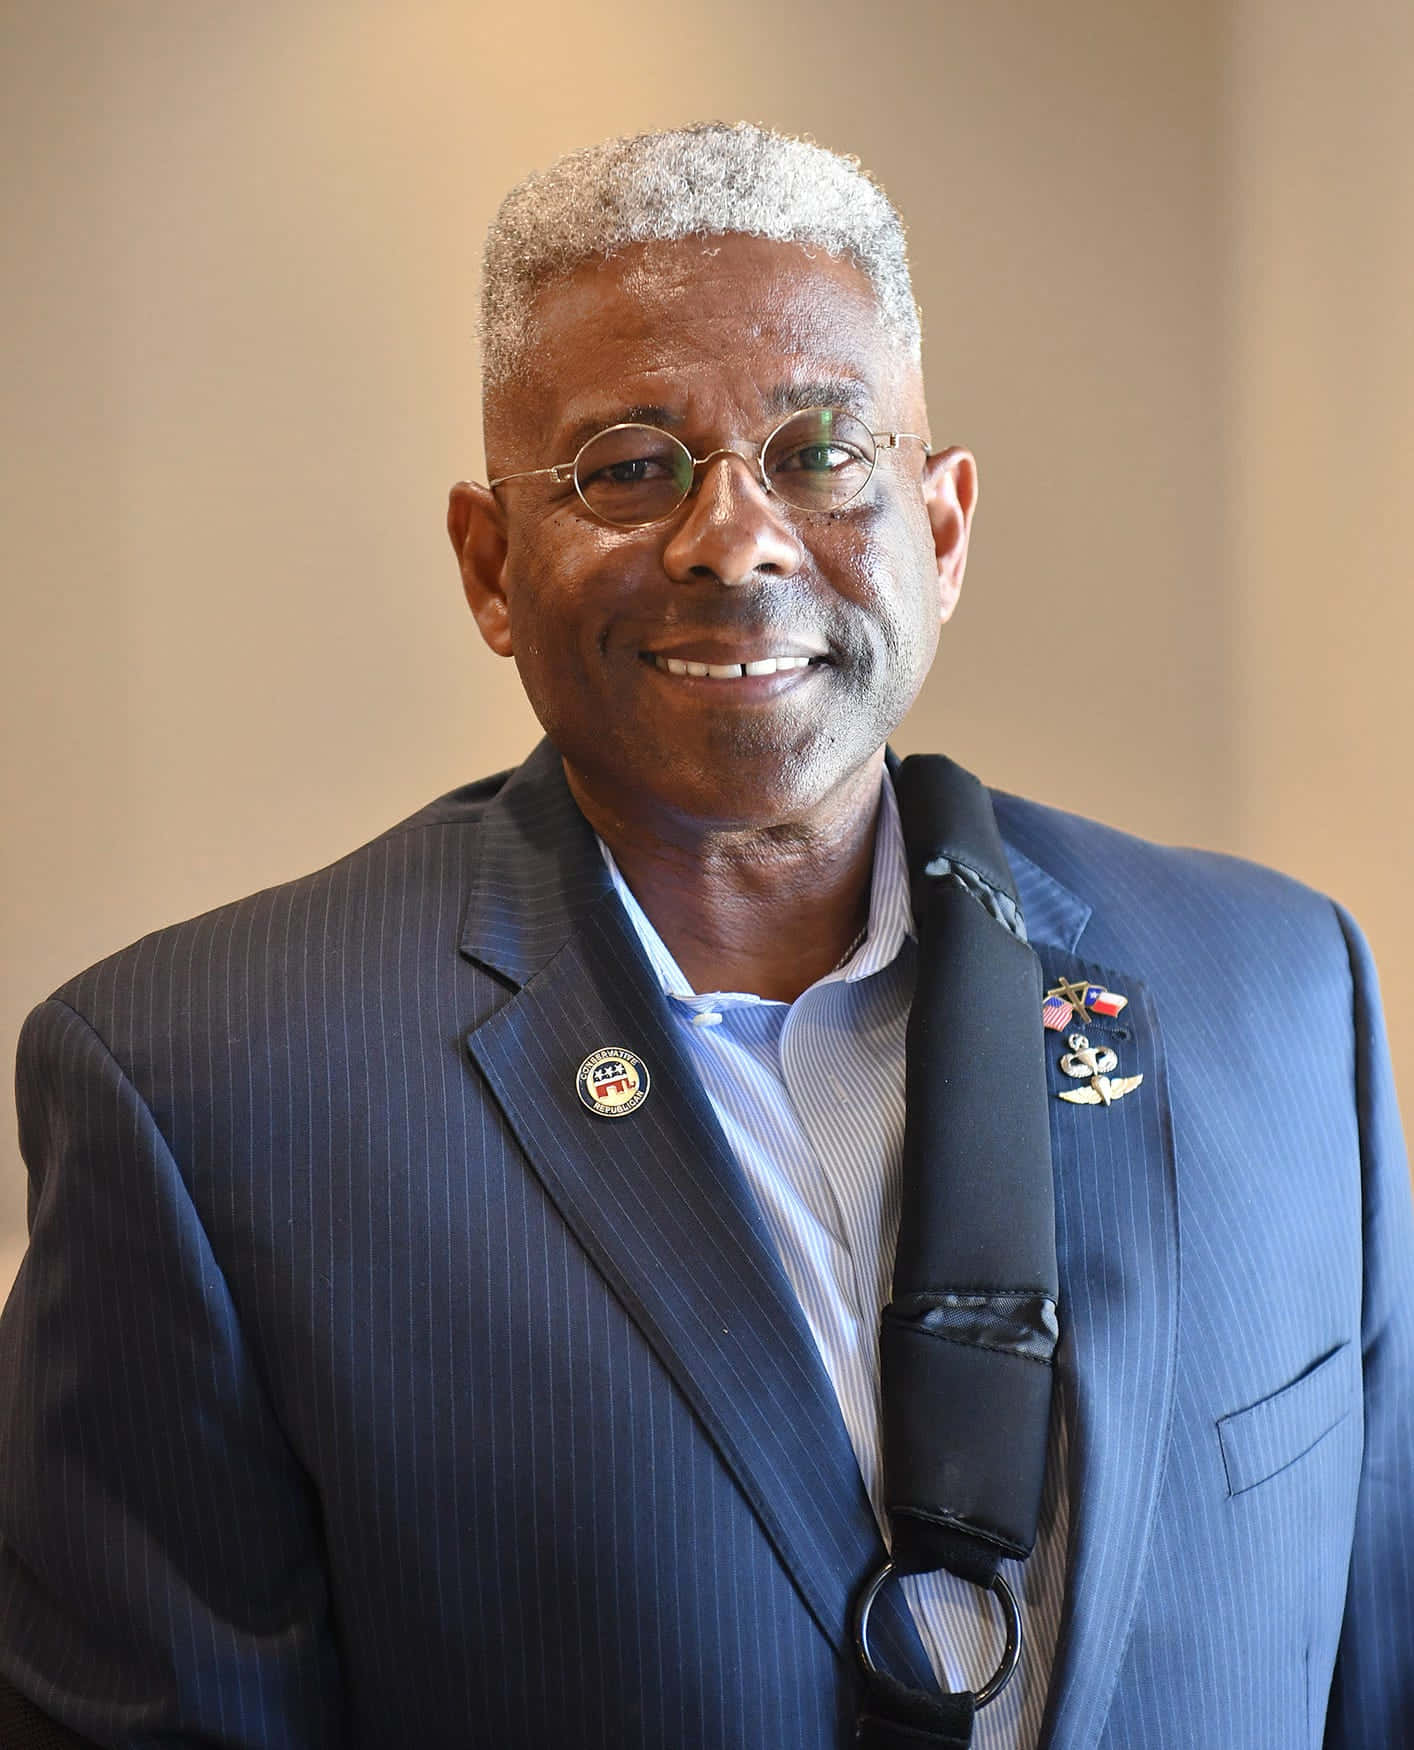 Allen West With Military Badge Wallpaper